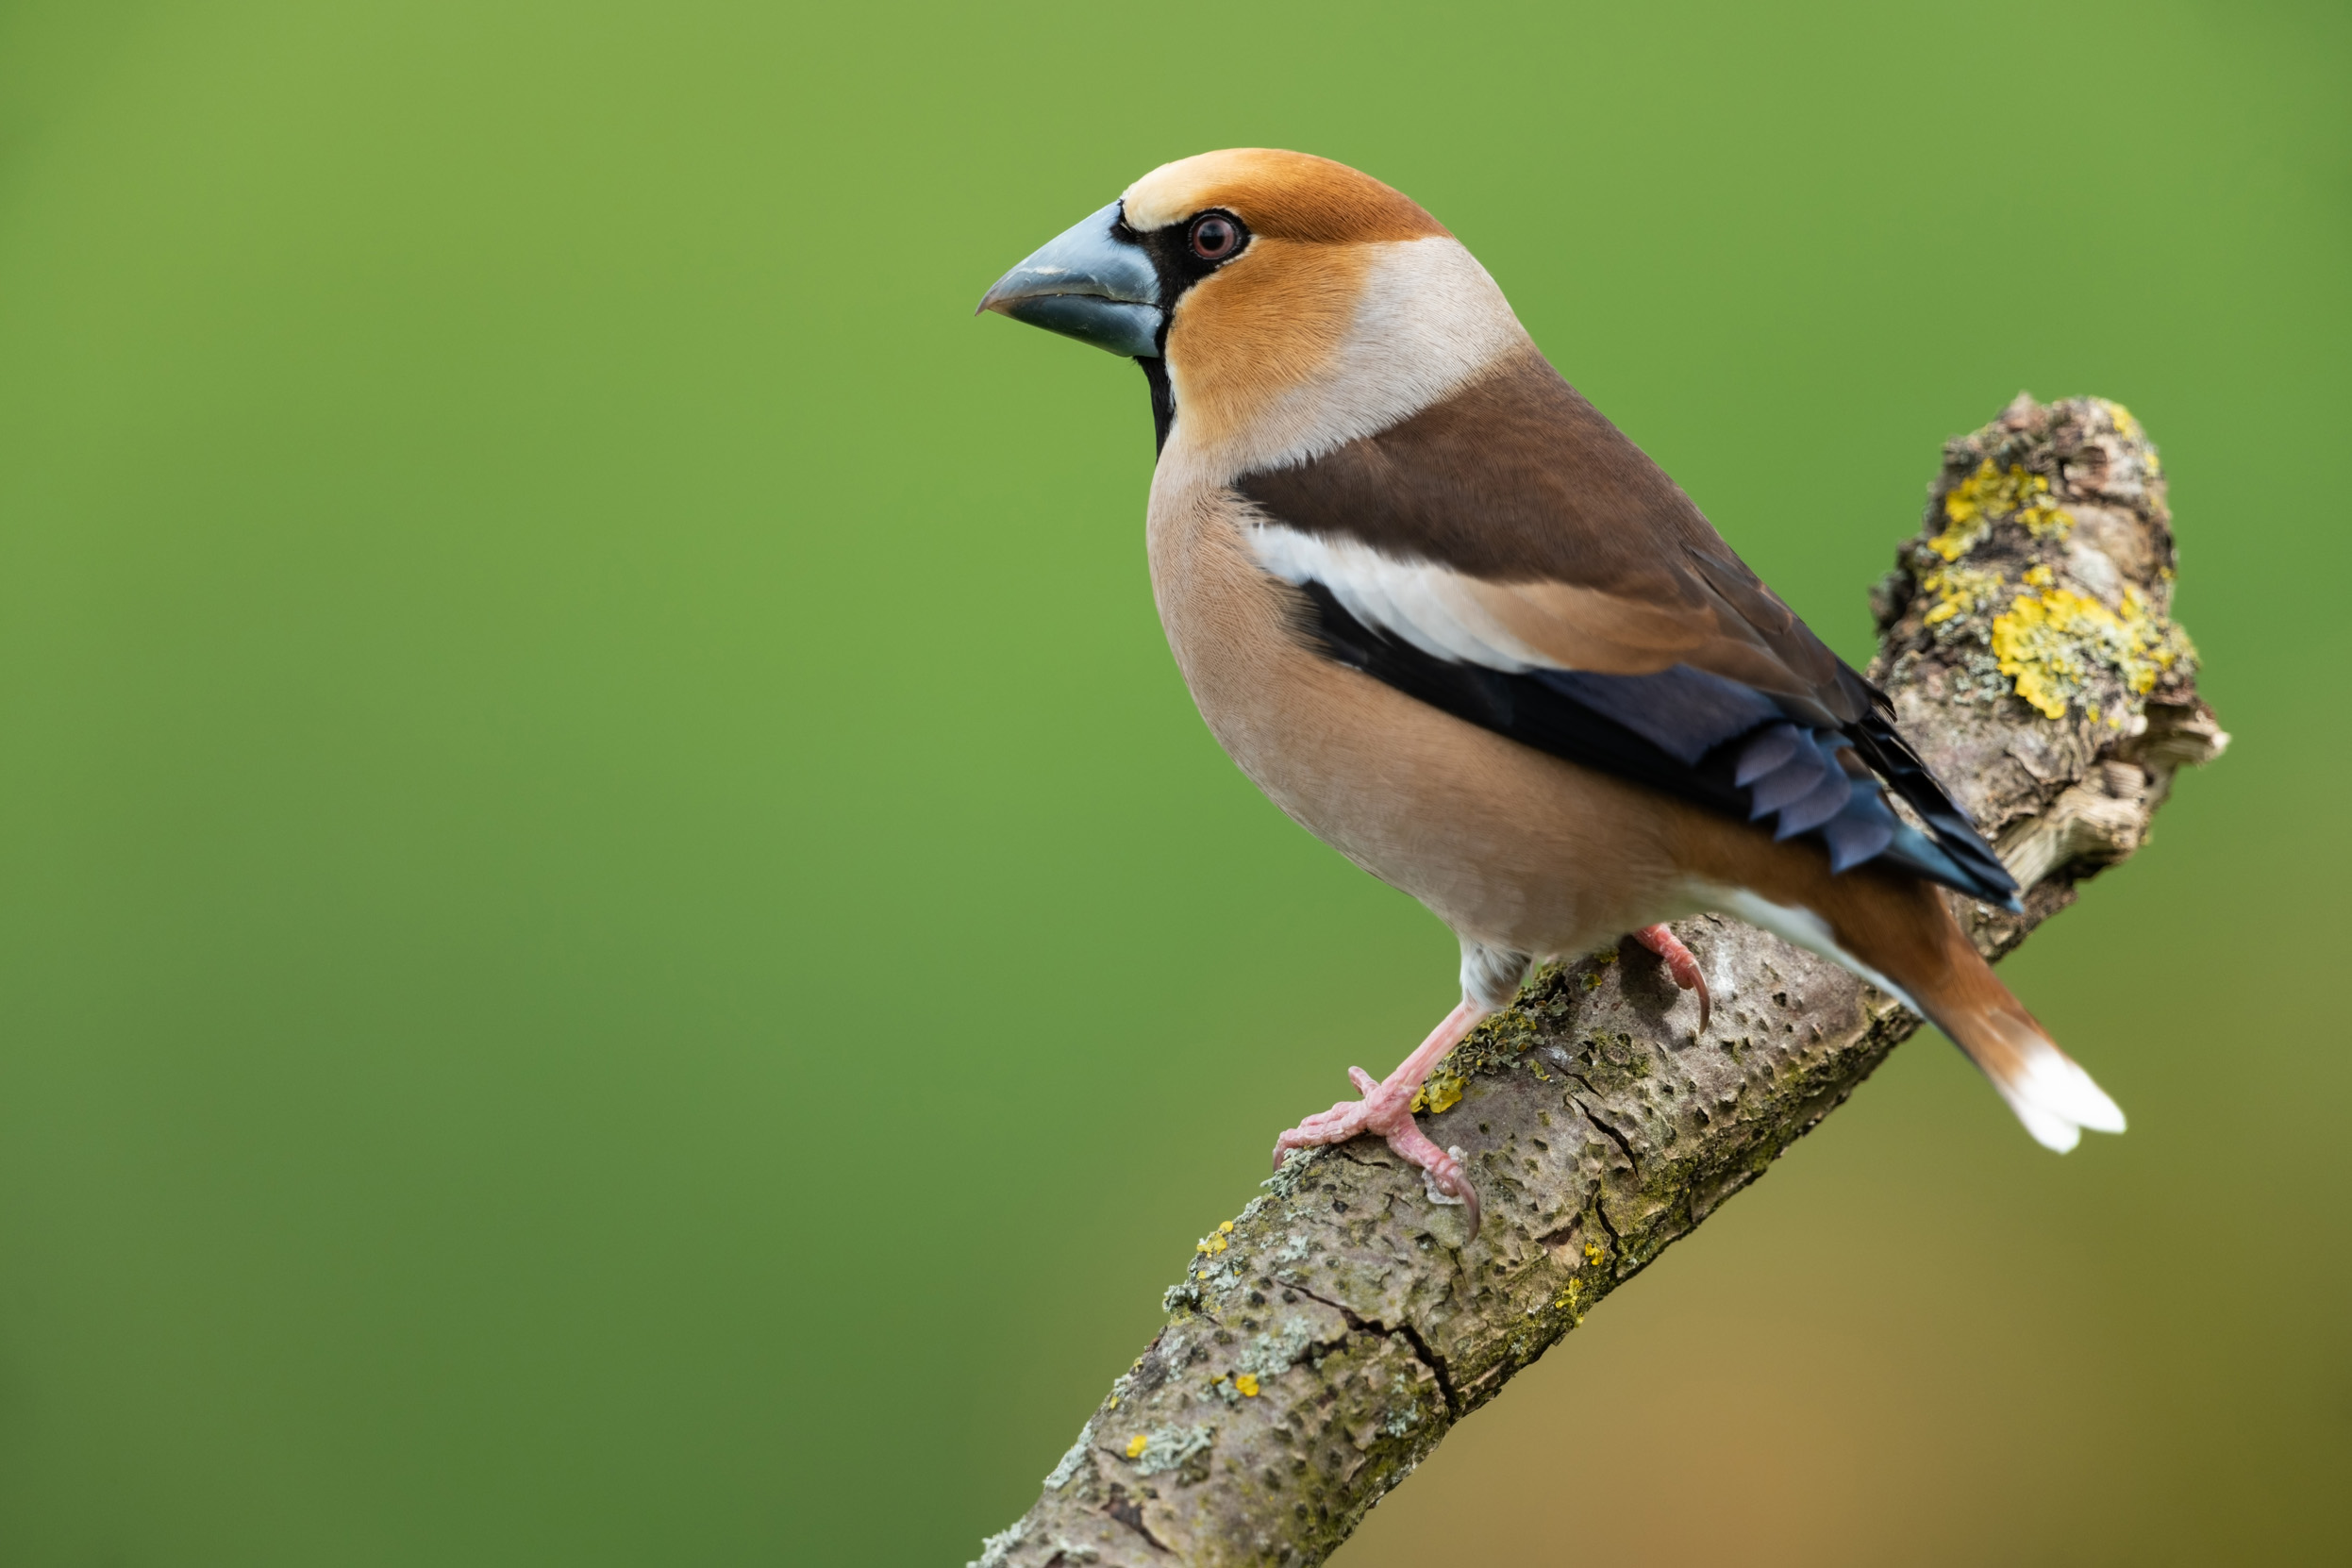 A male Hawfinch perched on a branch.